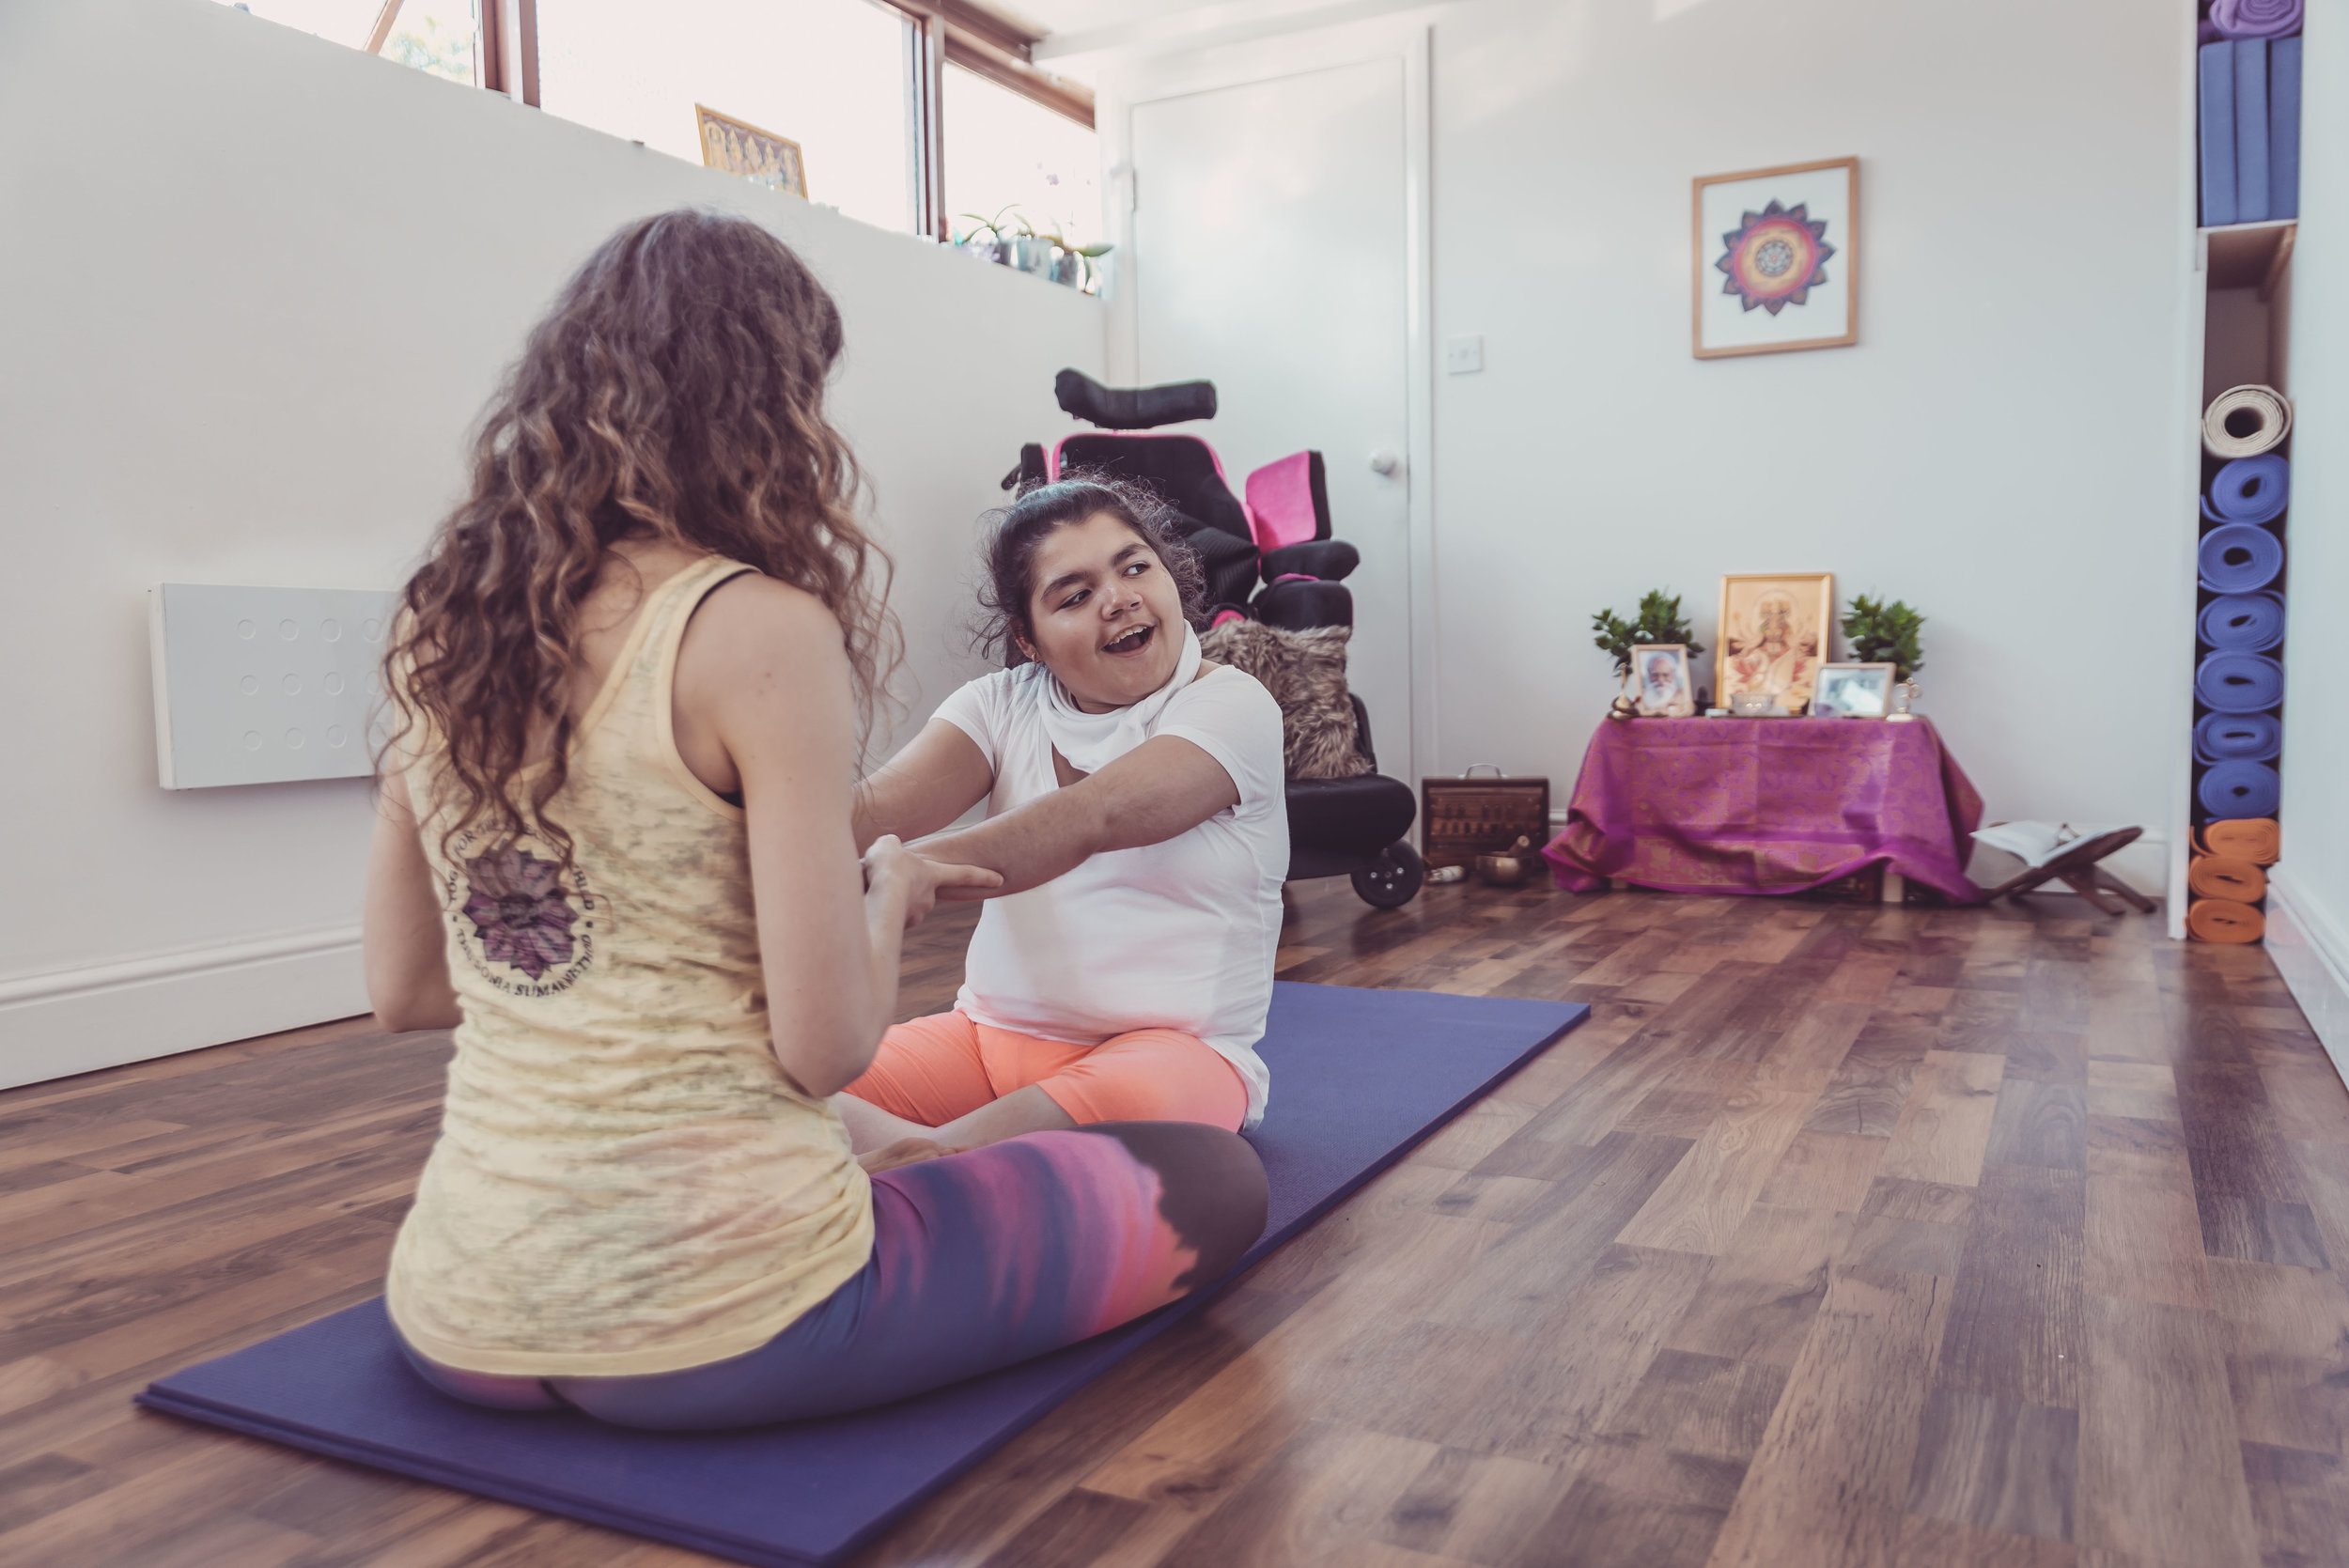 Special Needs yoga, Yoga for special needs, Autism, downs syndrome, SP, SEN, Special Yoga, Yoga therapy